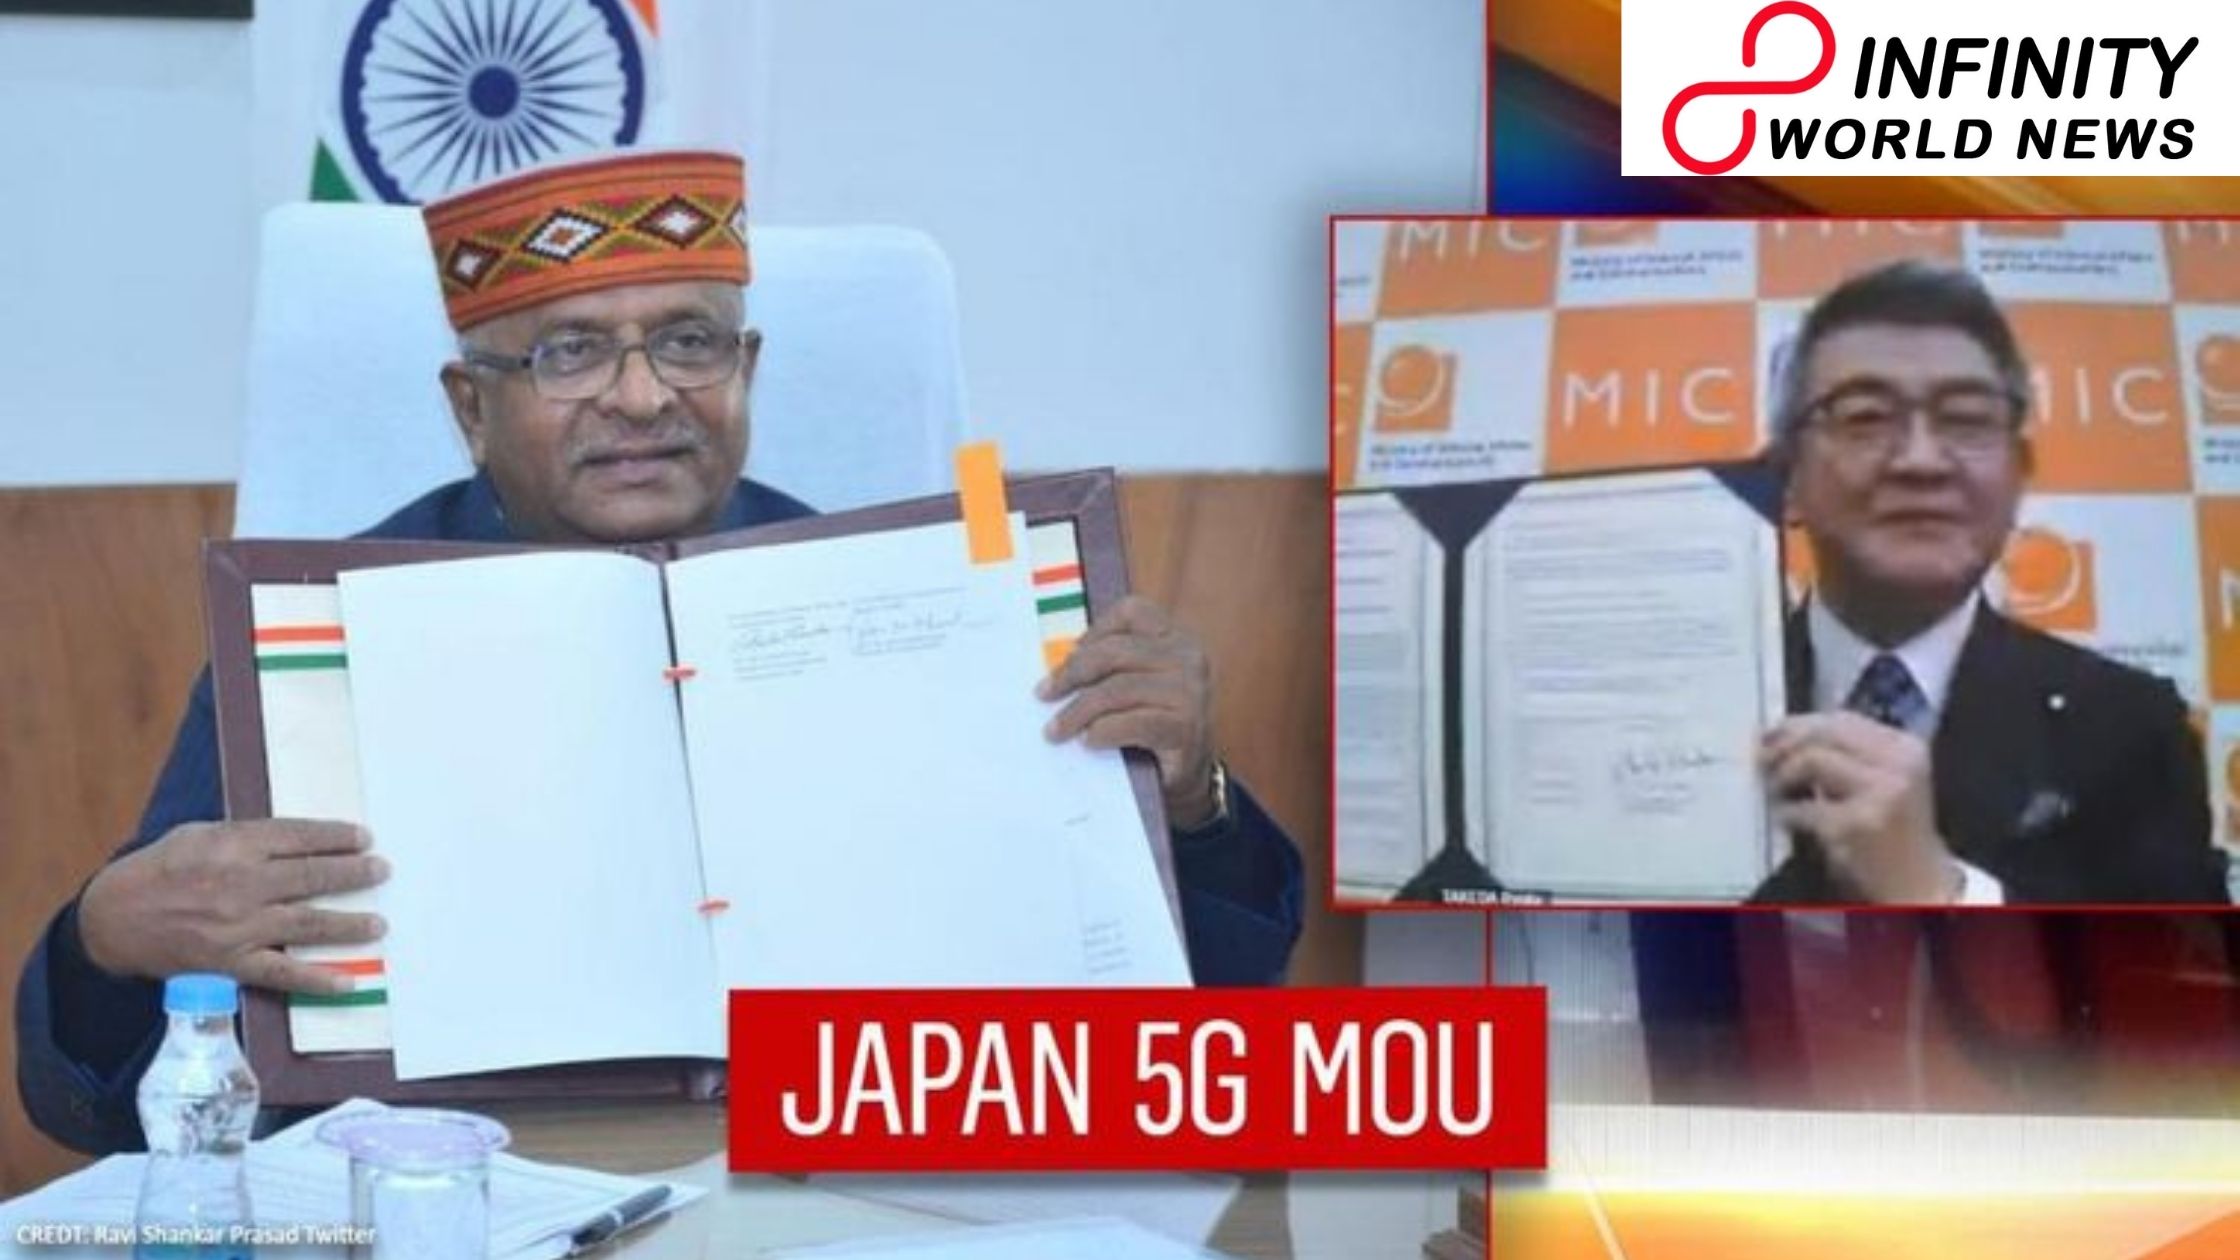 India, Japan consent to IT arrangement on 5G, AI